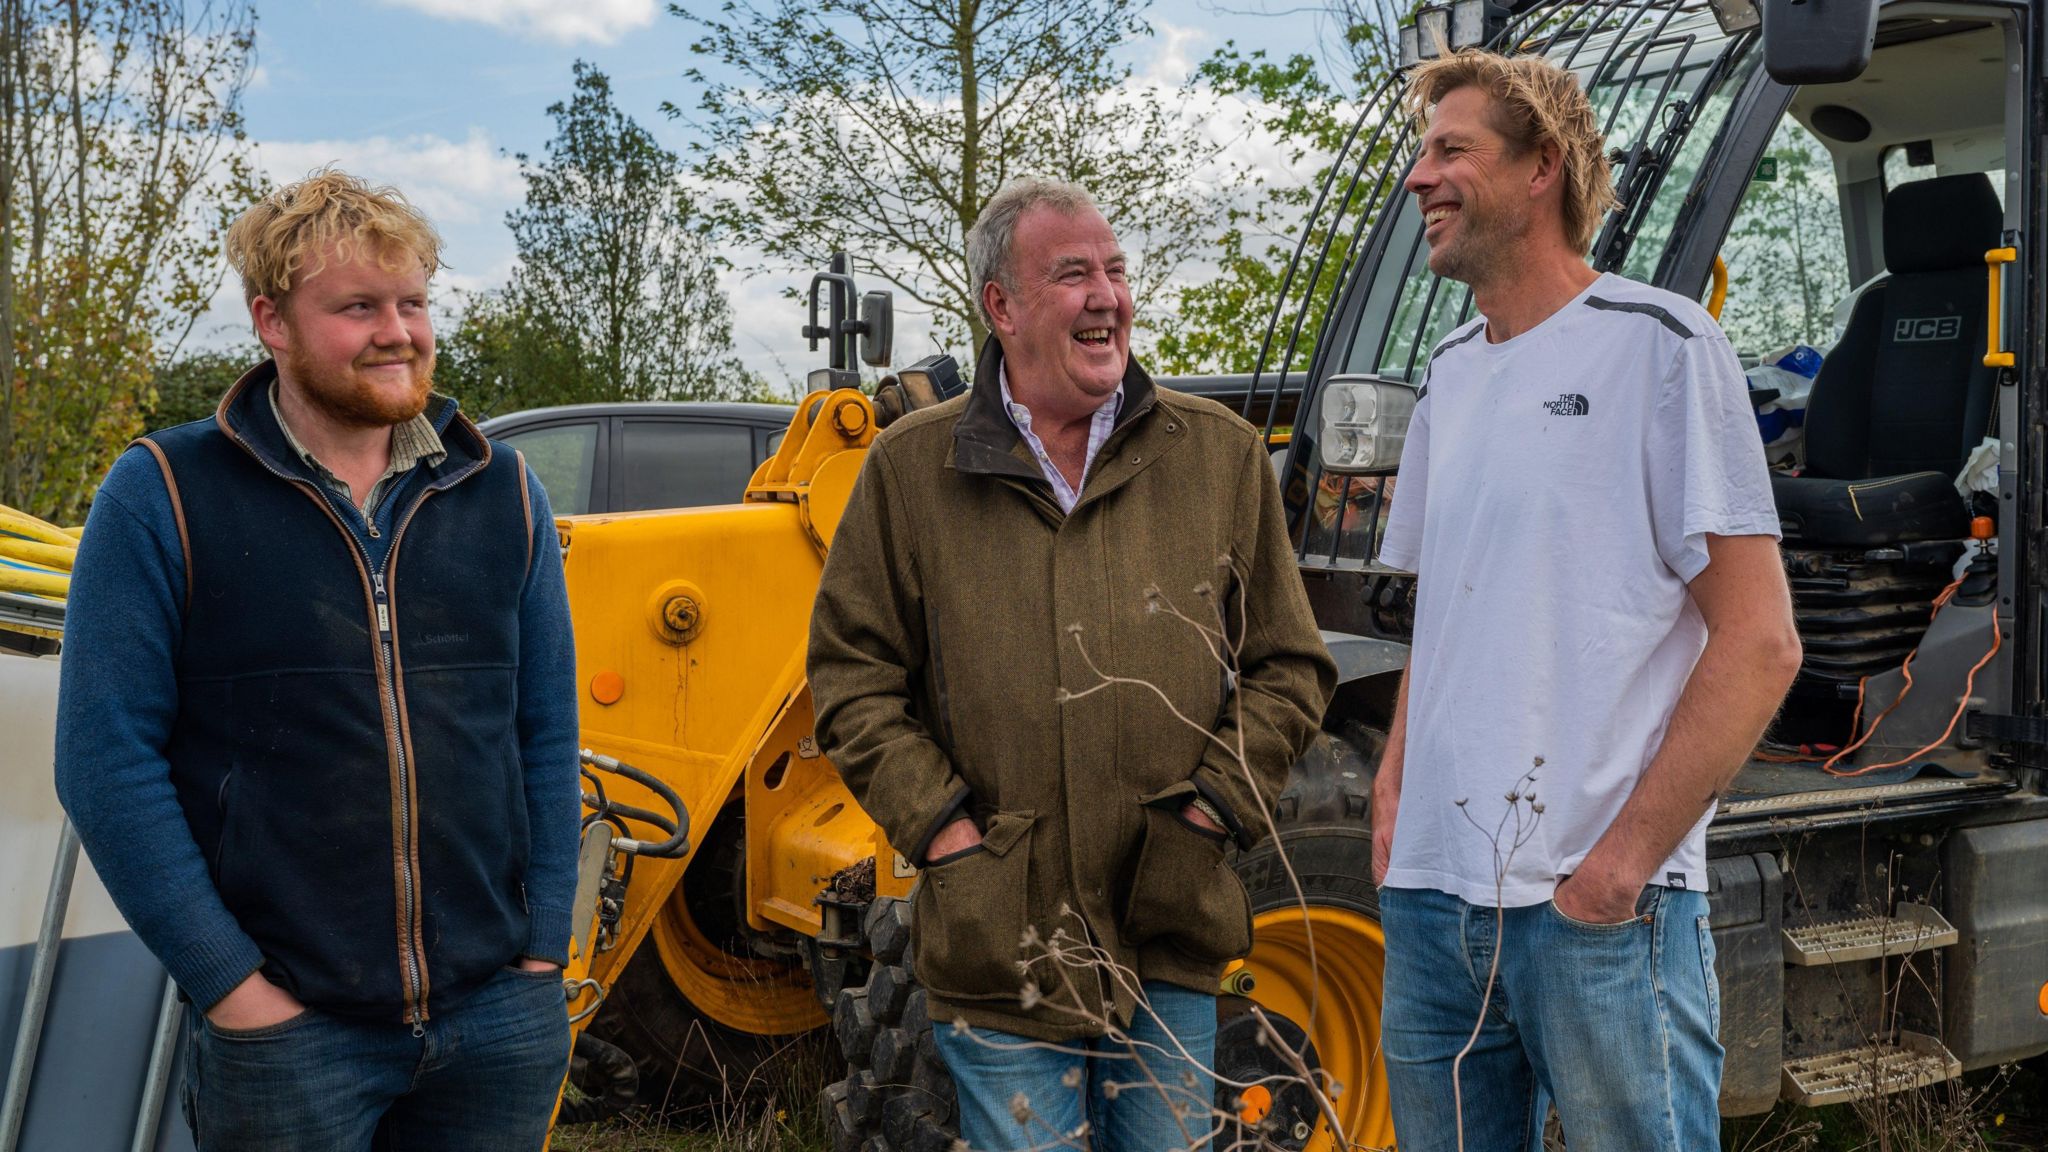 Andy Cato laughing with Jeremy Clarkson and Kaleb Cooper on Diddly Squat farm in the Cotswolds, standing in front of a telehandler.